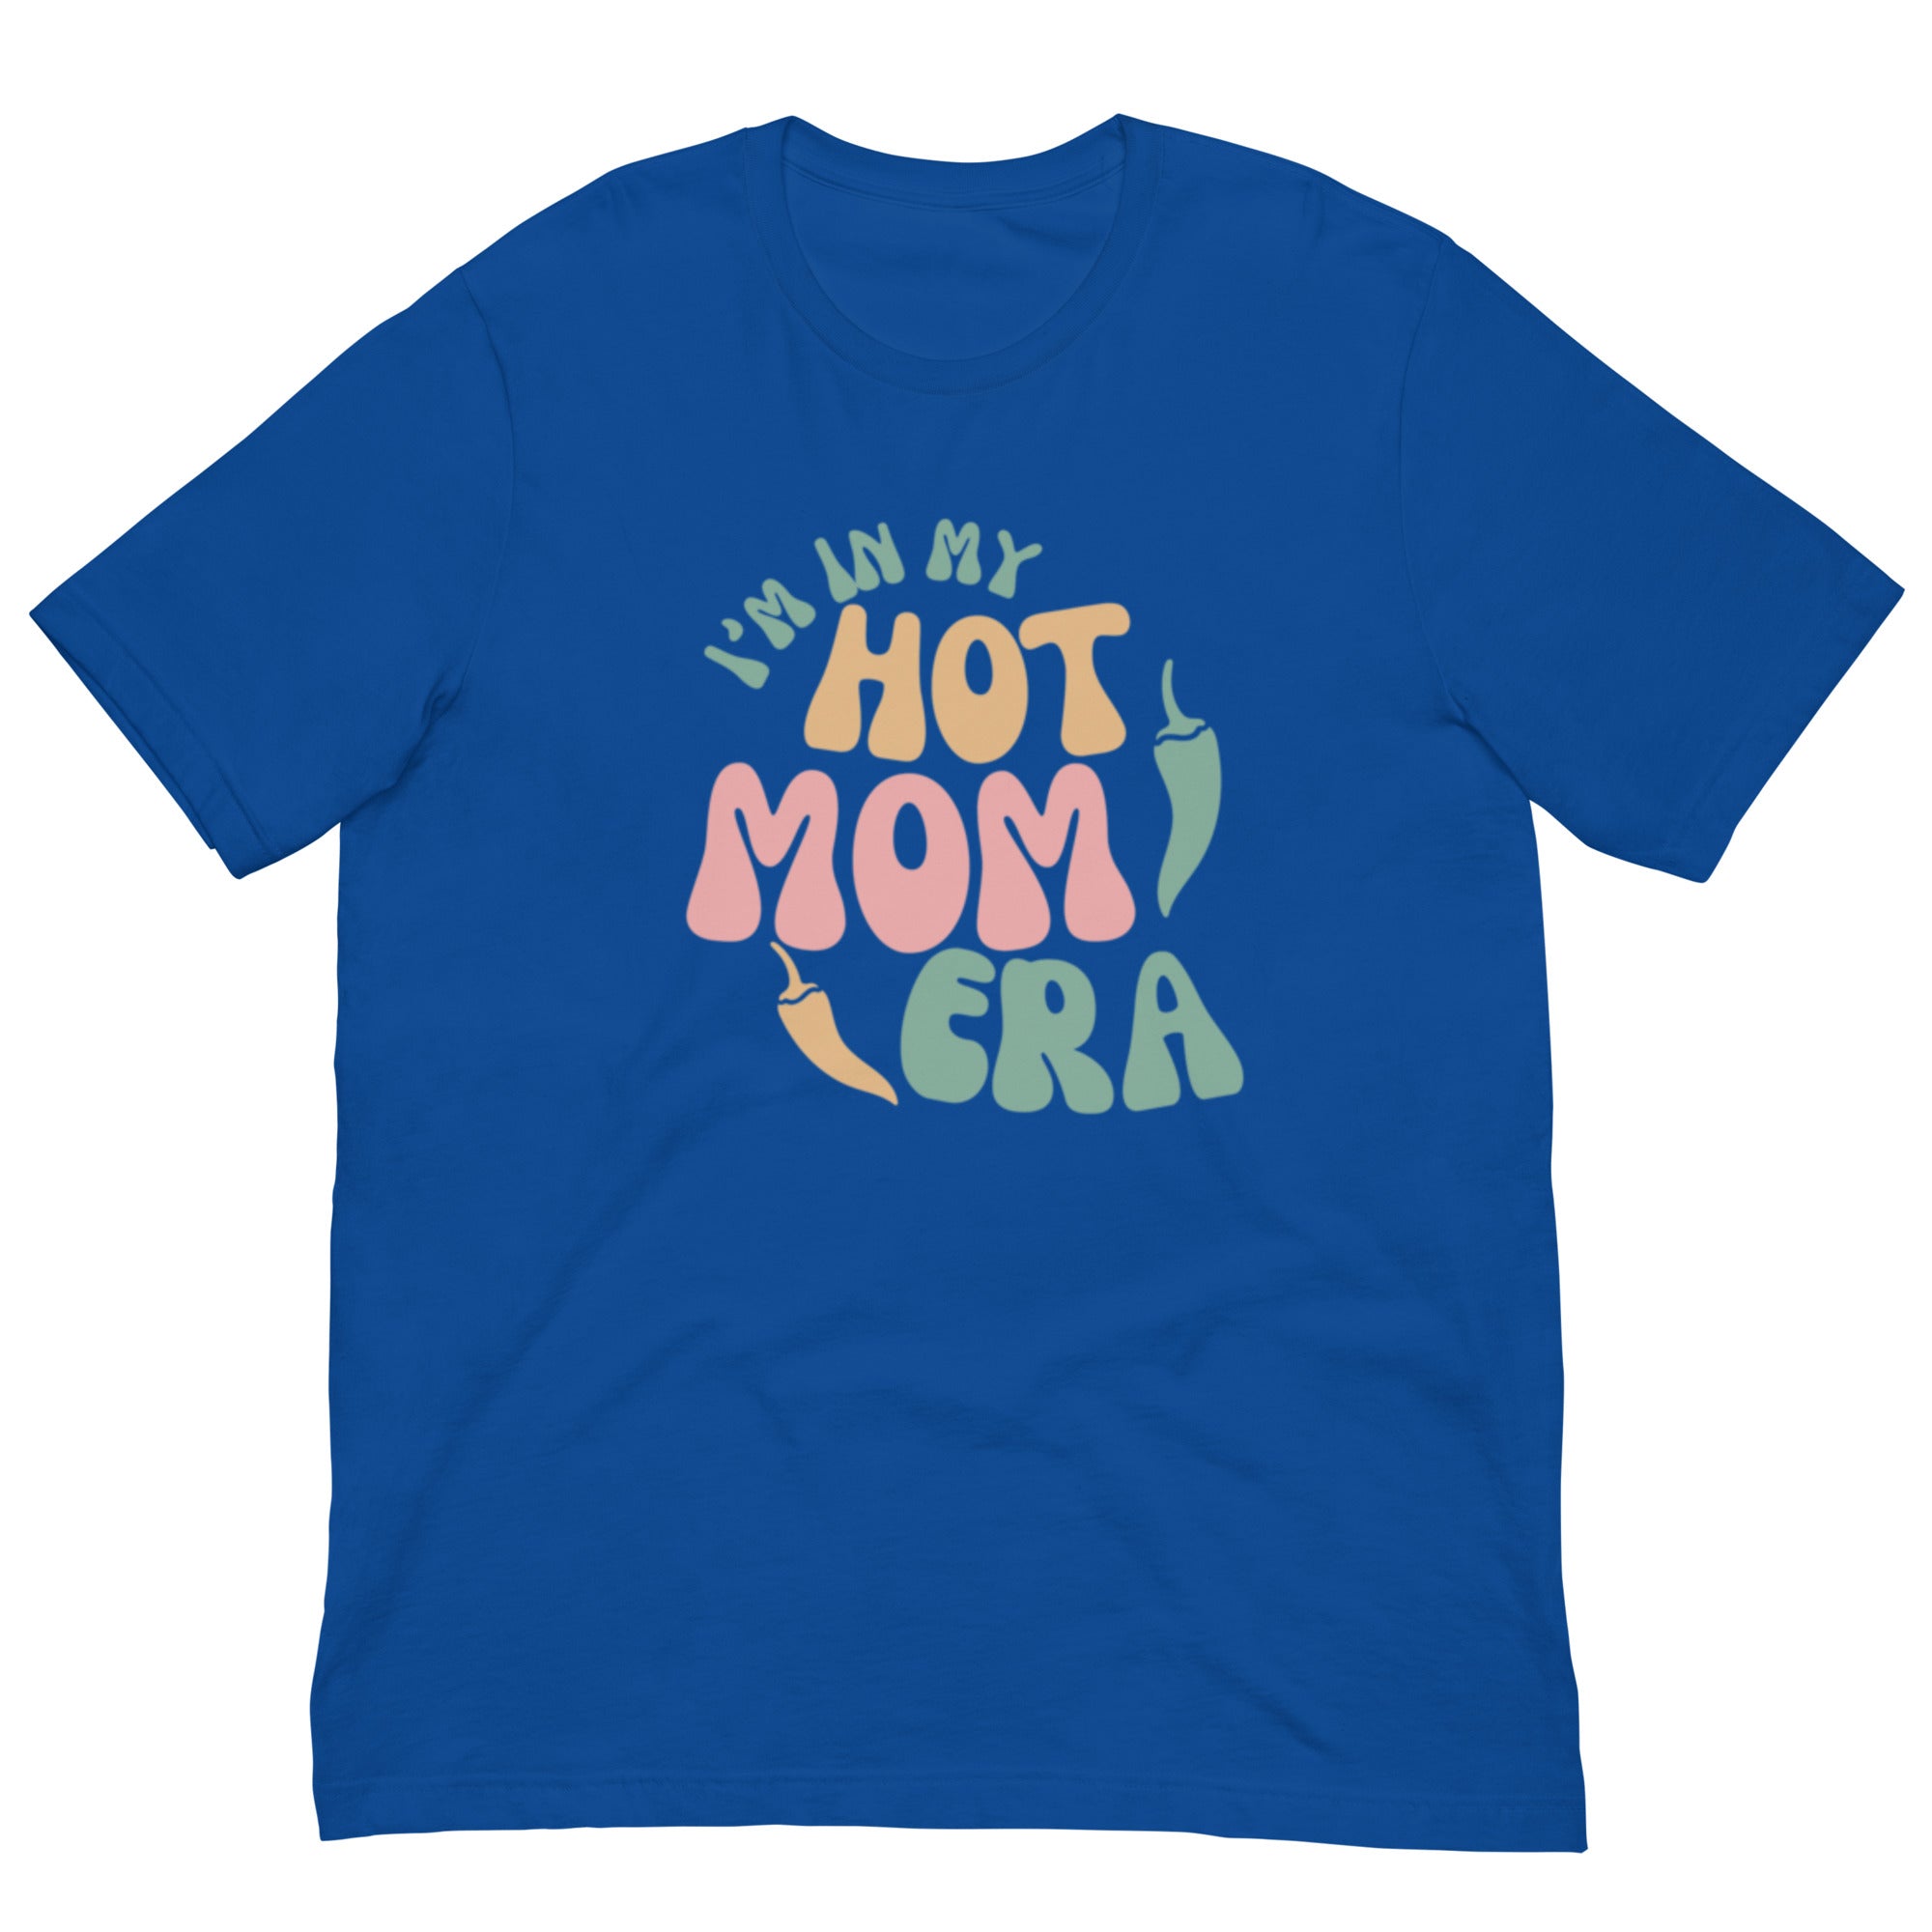 A blue breathable Era Shirt with the phrase "in my hot mom era" written in stylized, colorful letters. The text includes playful, leafy designs.